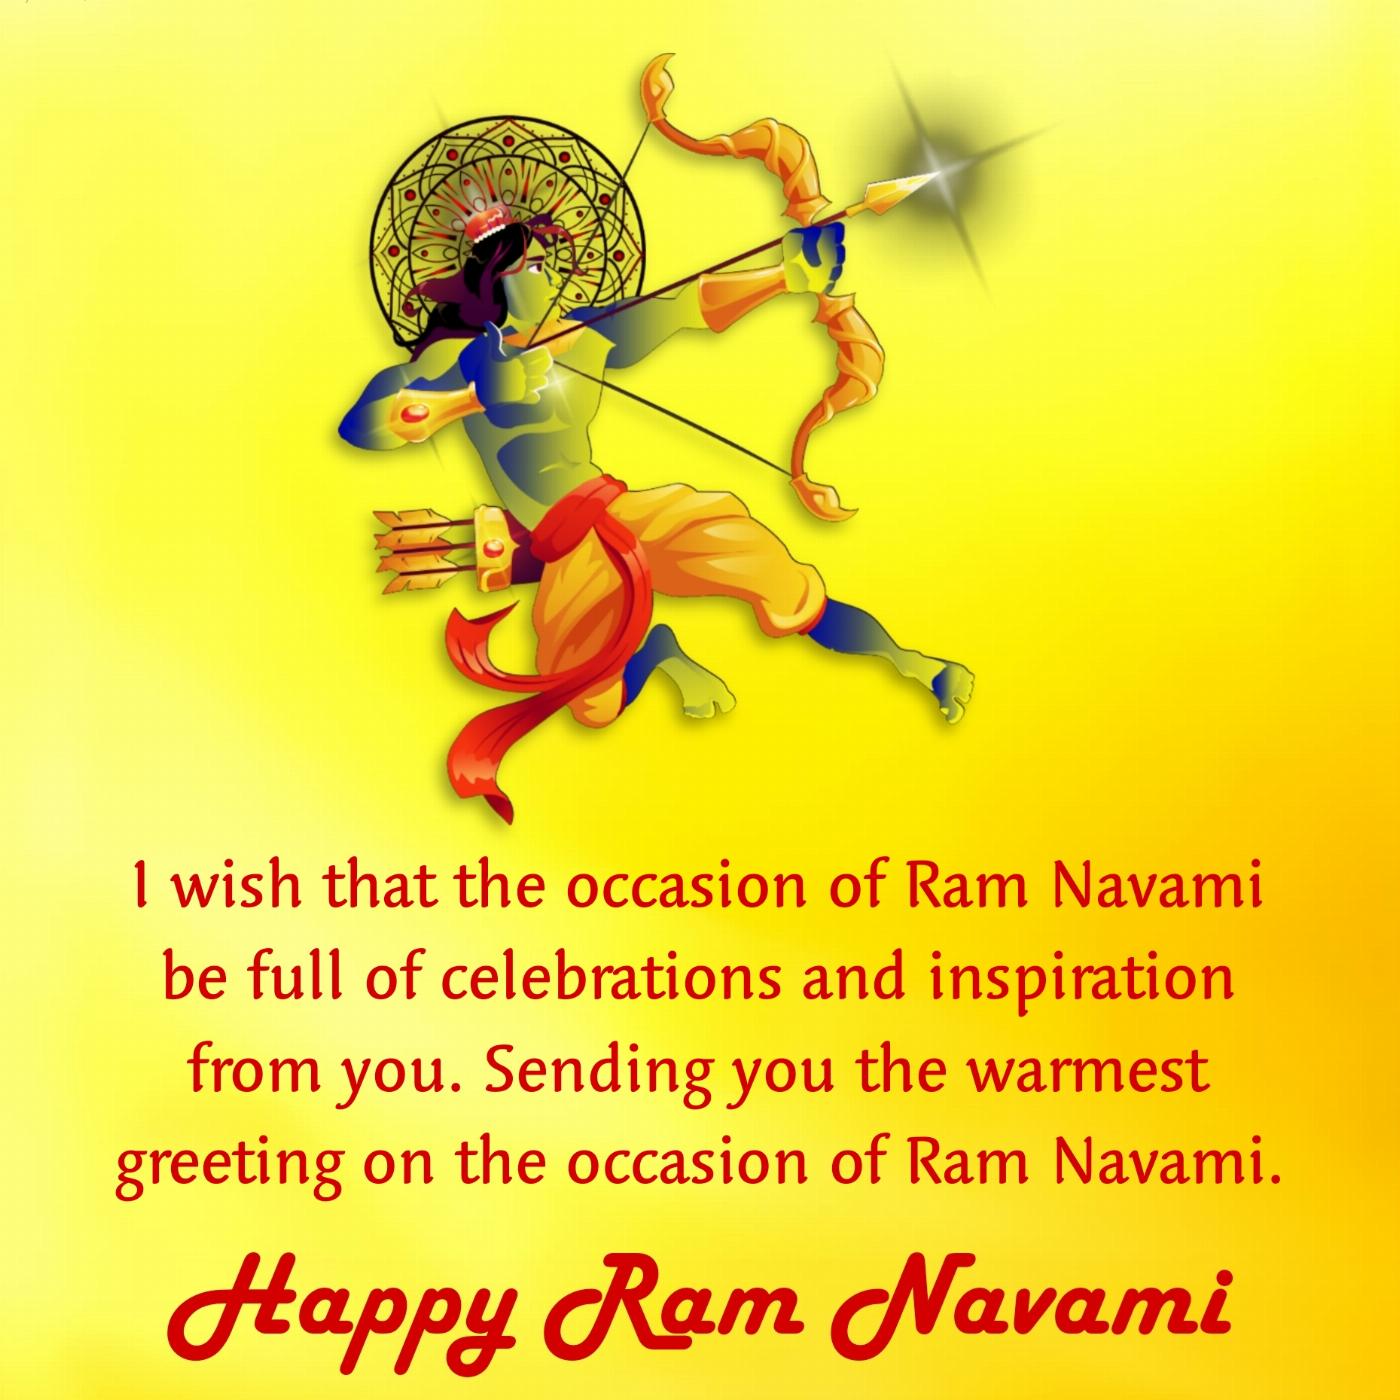 I wish that the occasion of Ram Navami be full of celebrations